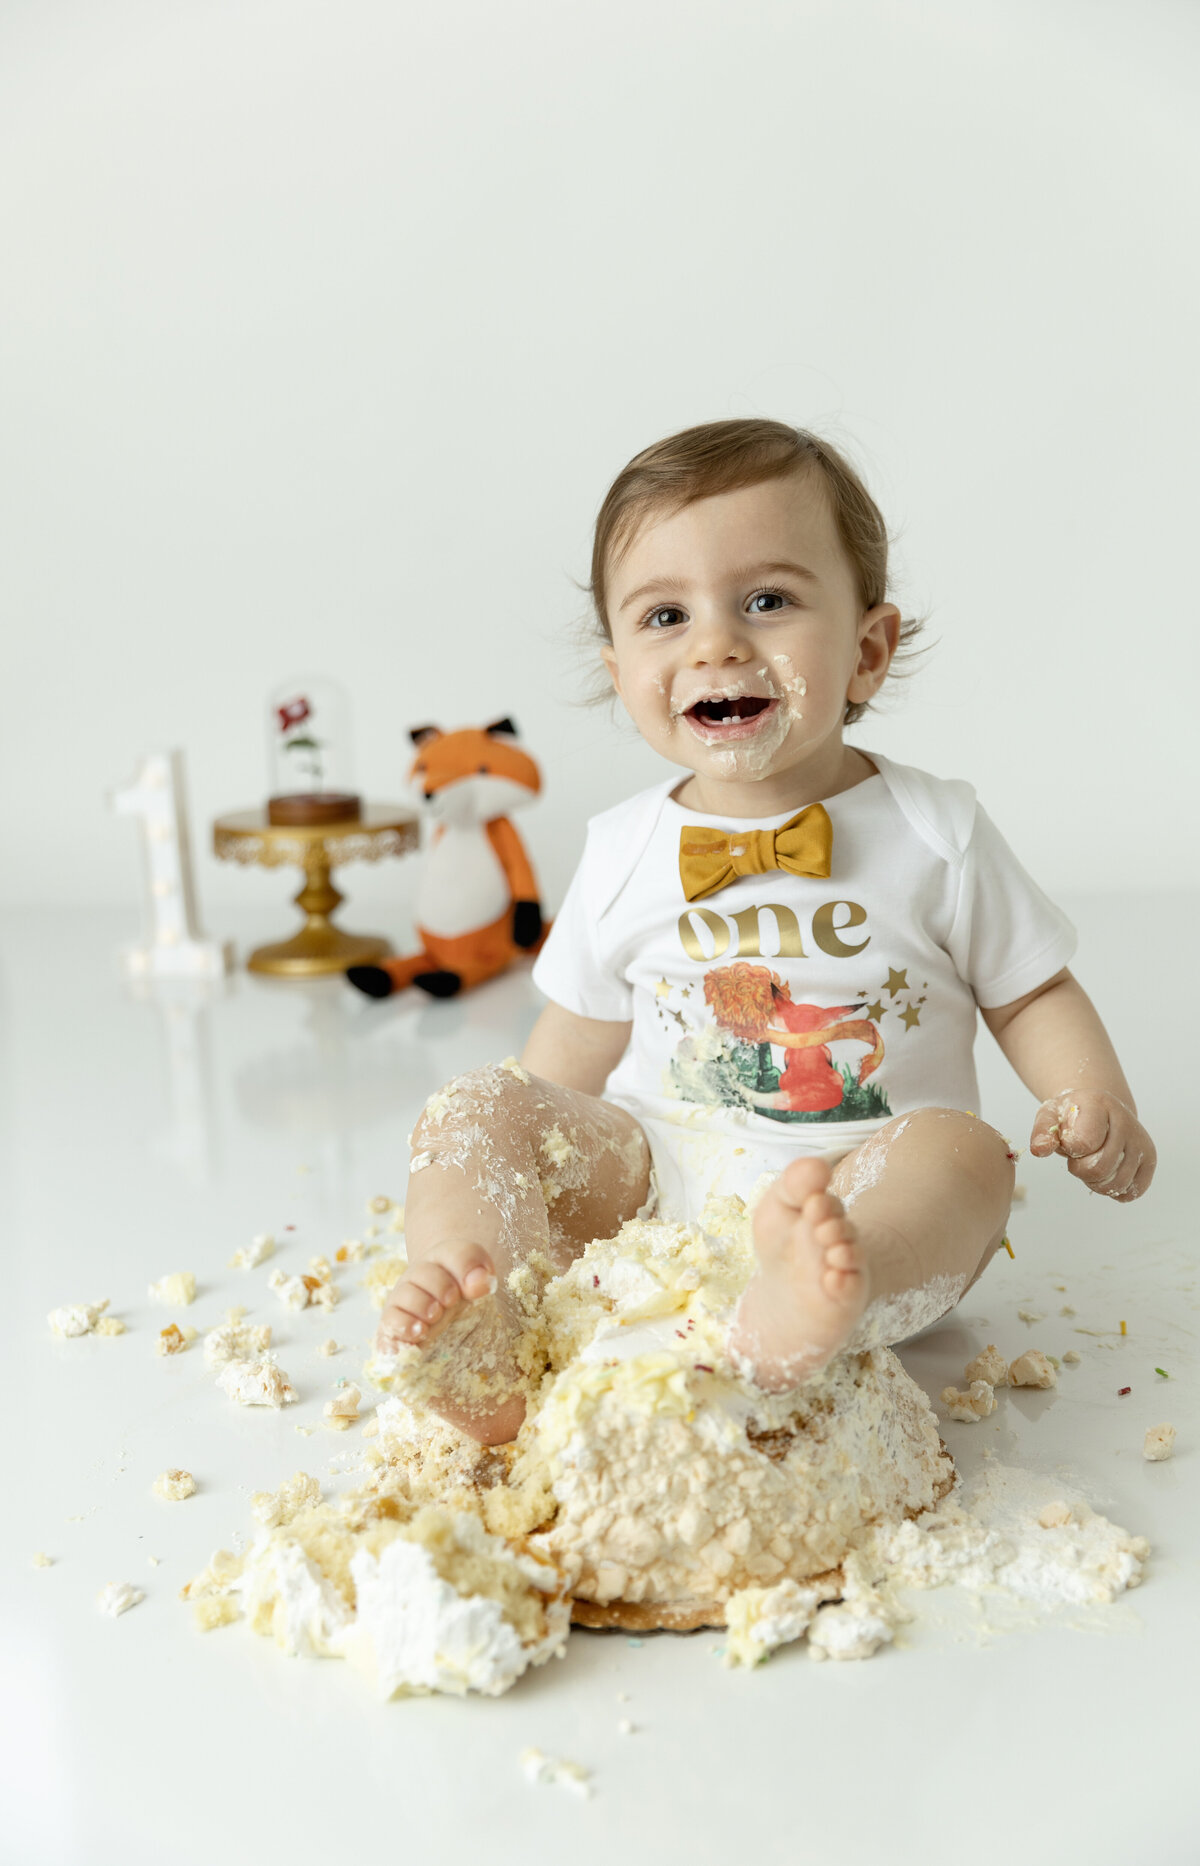 A happy young toddler boy plays and makes a mess in a studio while destroying a cake